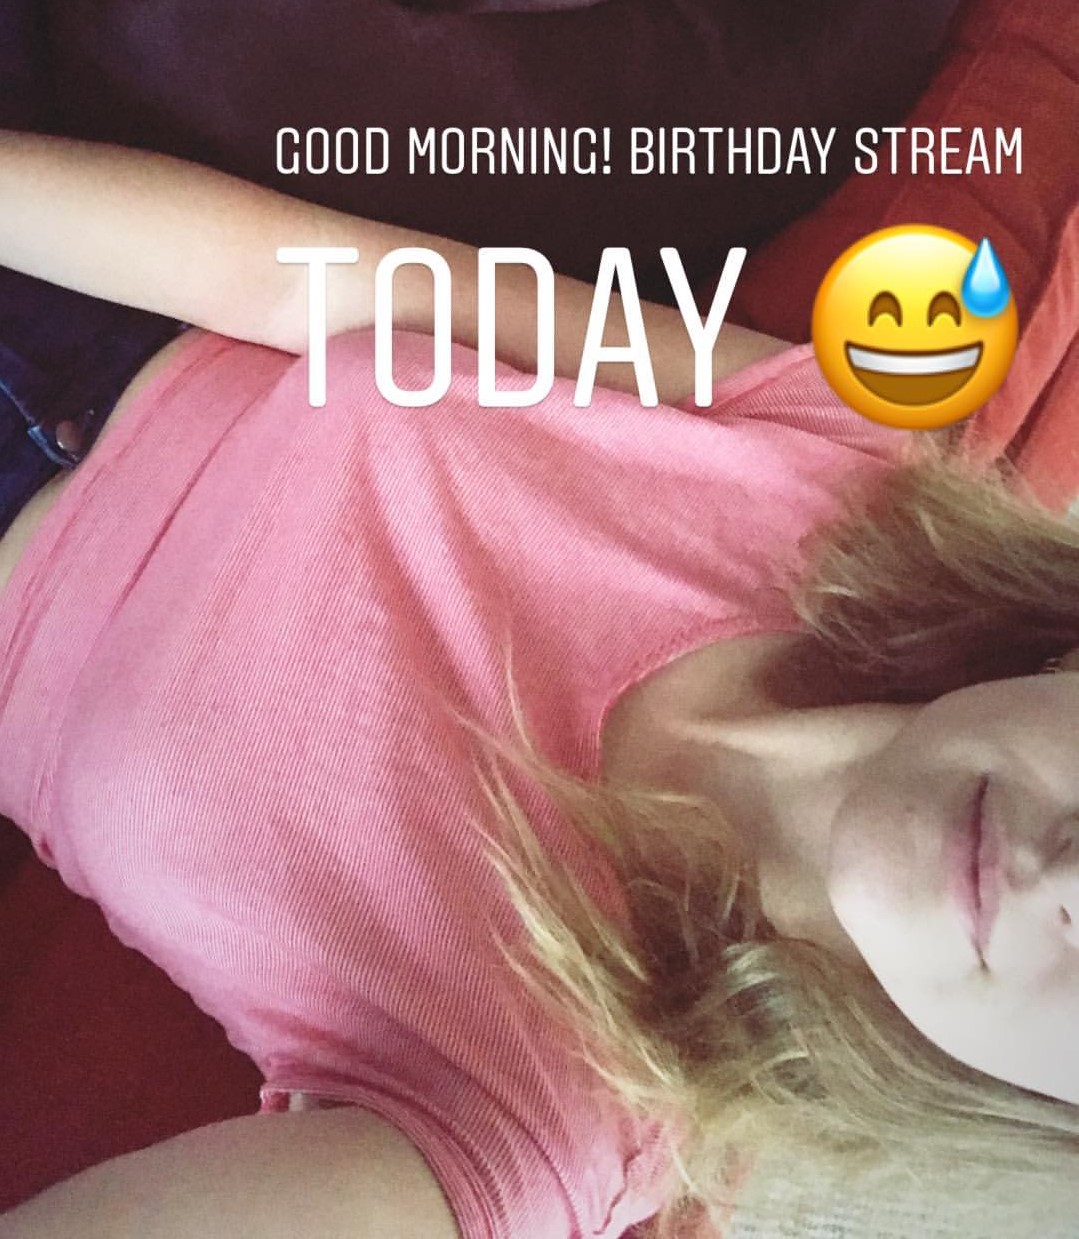 Kittplays Sexy Pictures (47 Pics)